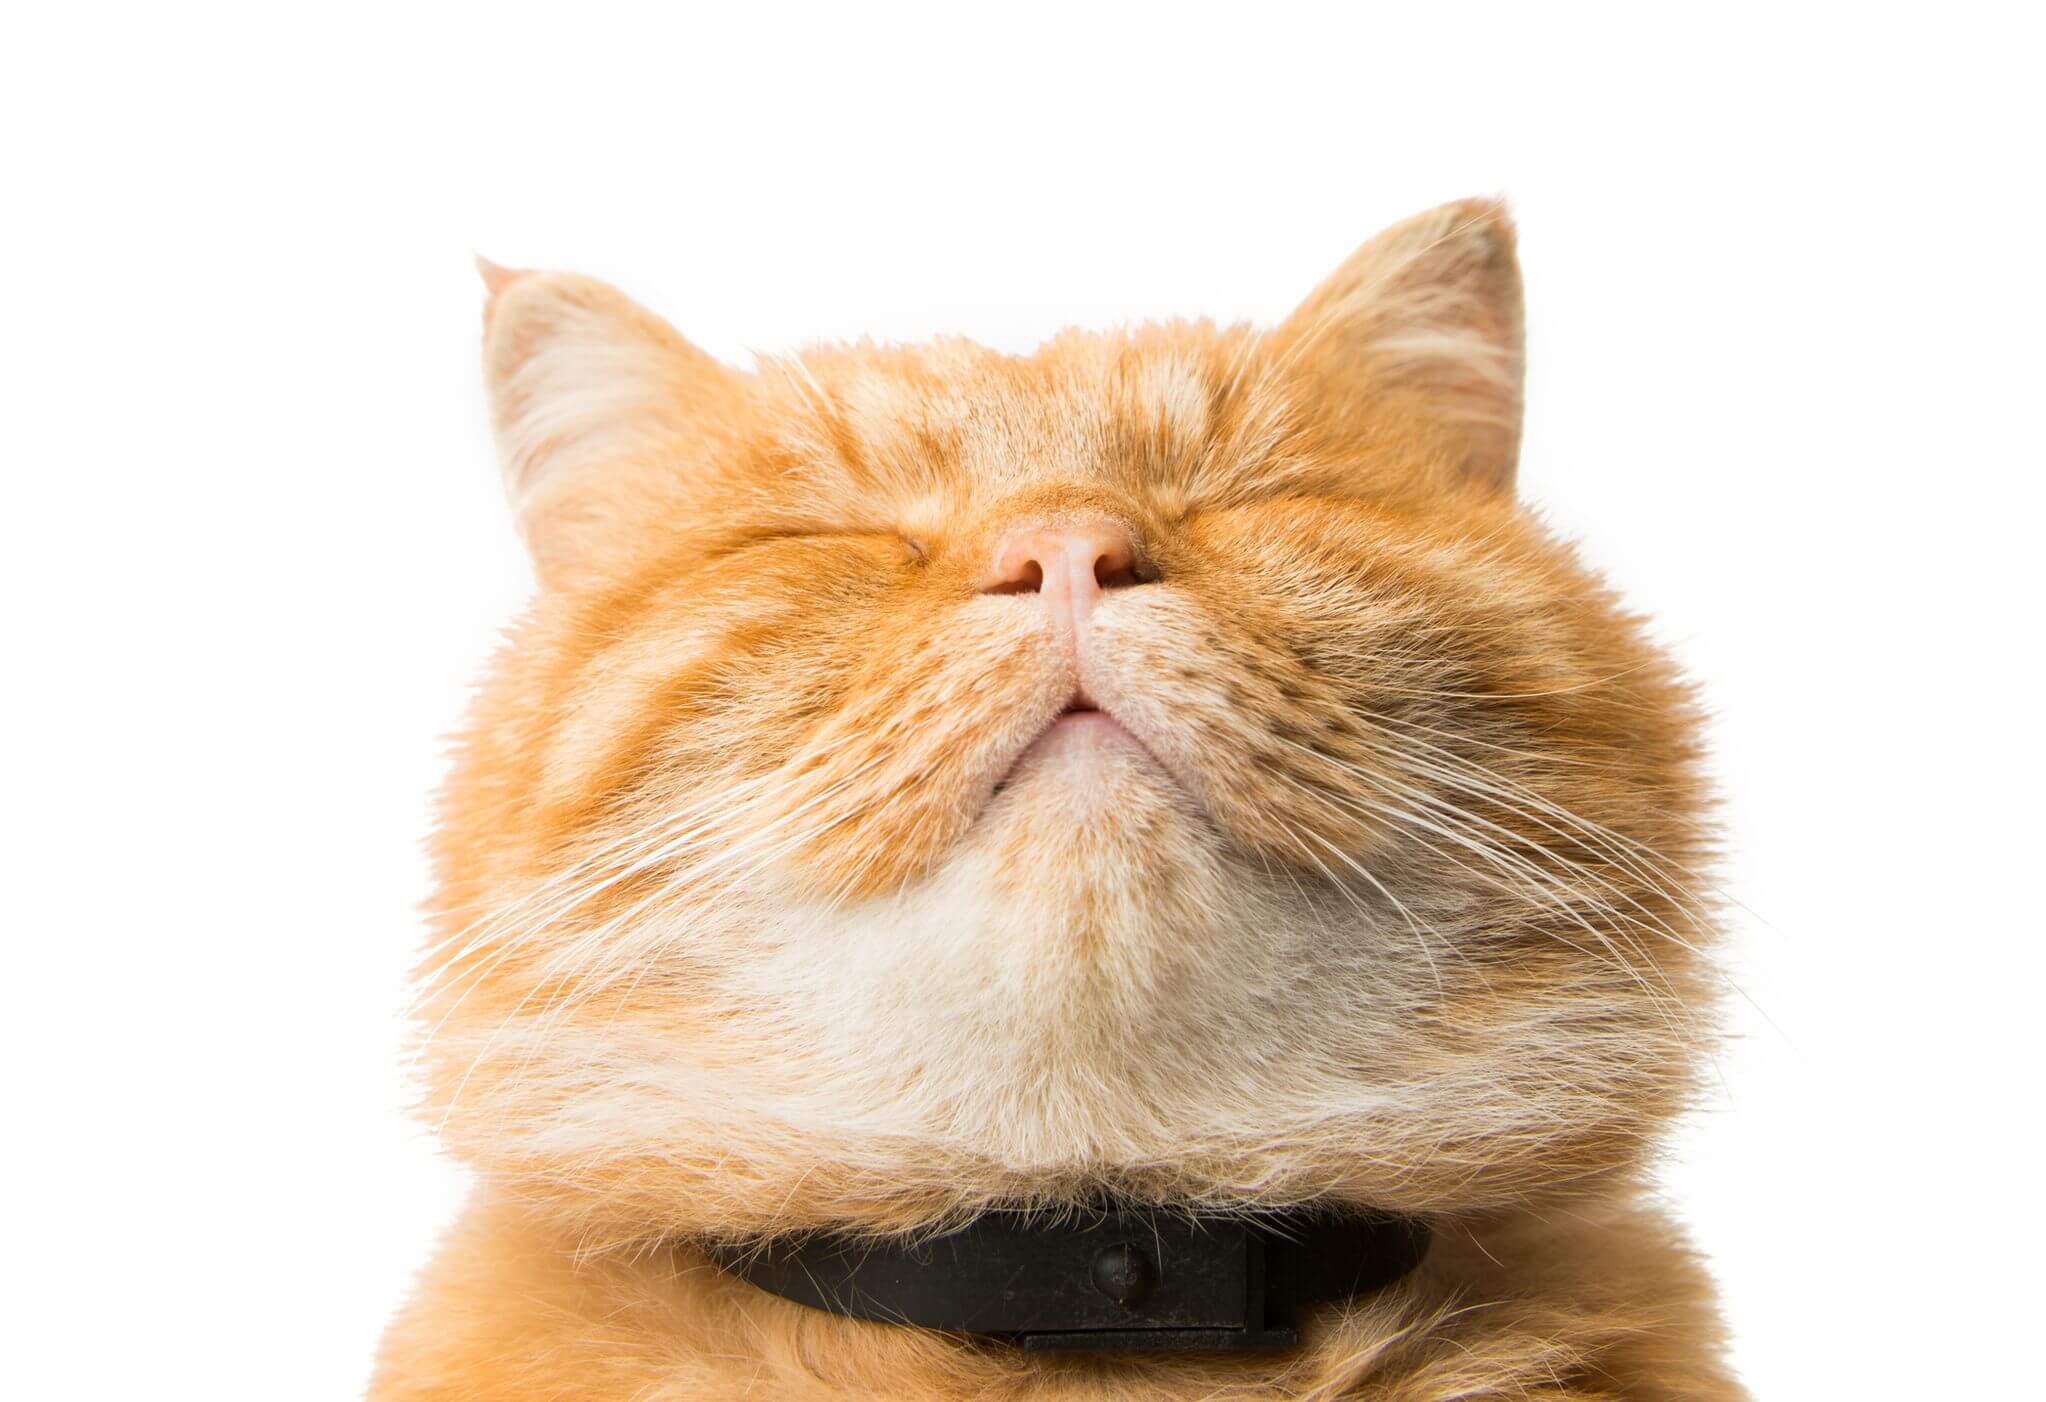 Cats Express your emotions, but can we recognize them?